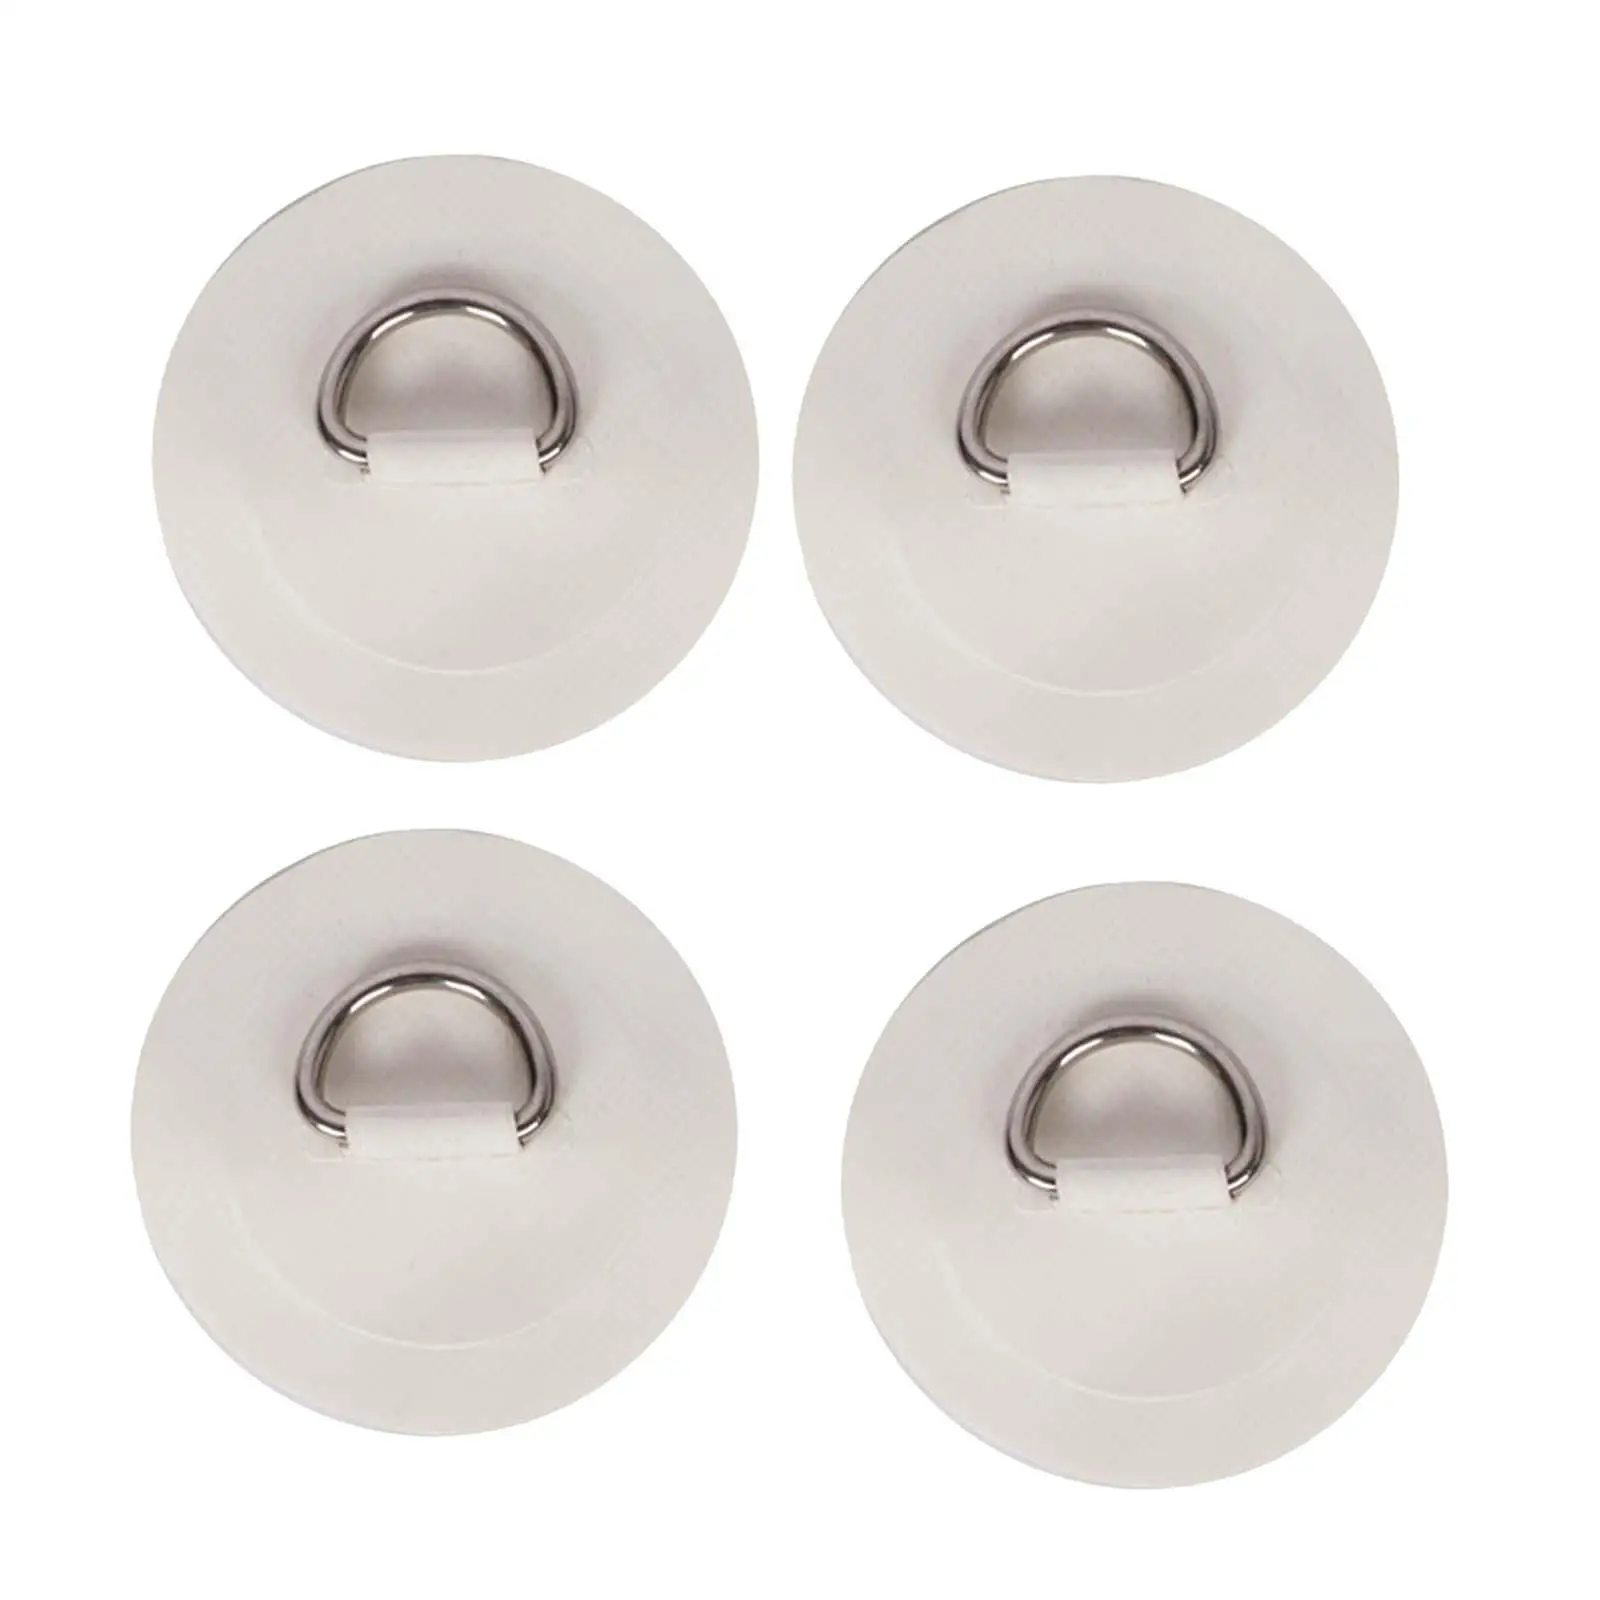 4 Pieces Stainless Steel D Rings Patch Boats Surfboard Kayaks Canoes Lightweight PVC Inflatable Boats D Rings Pad PVC Patch